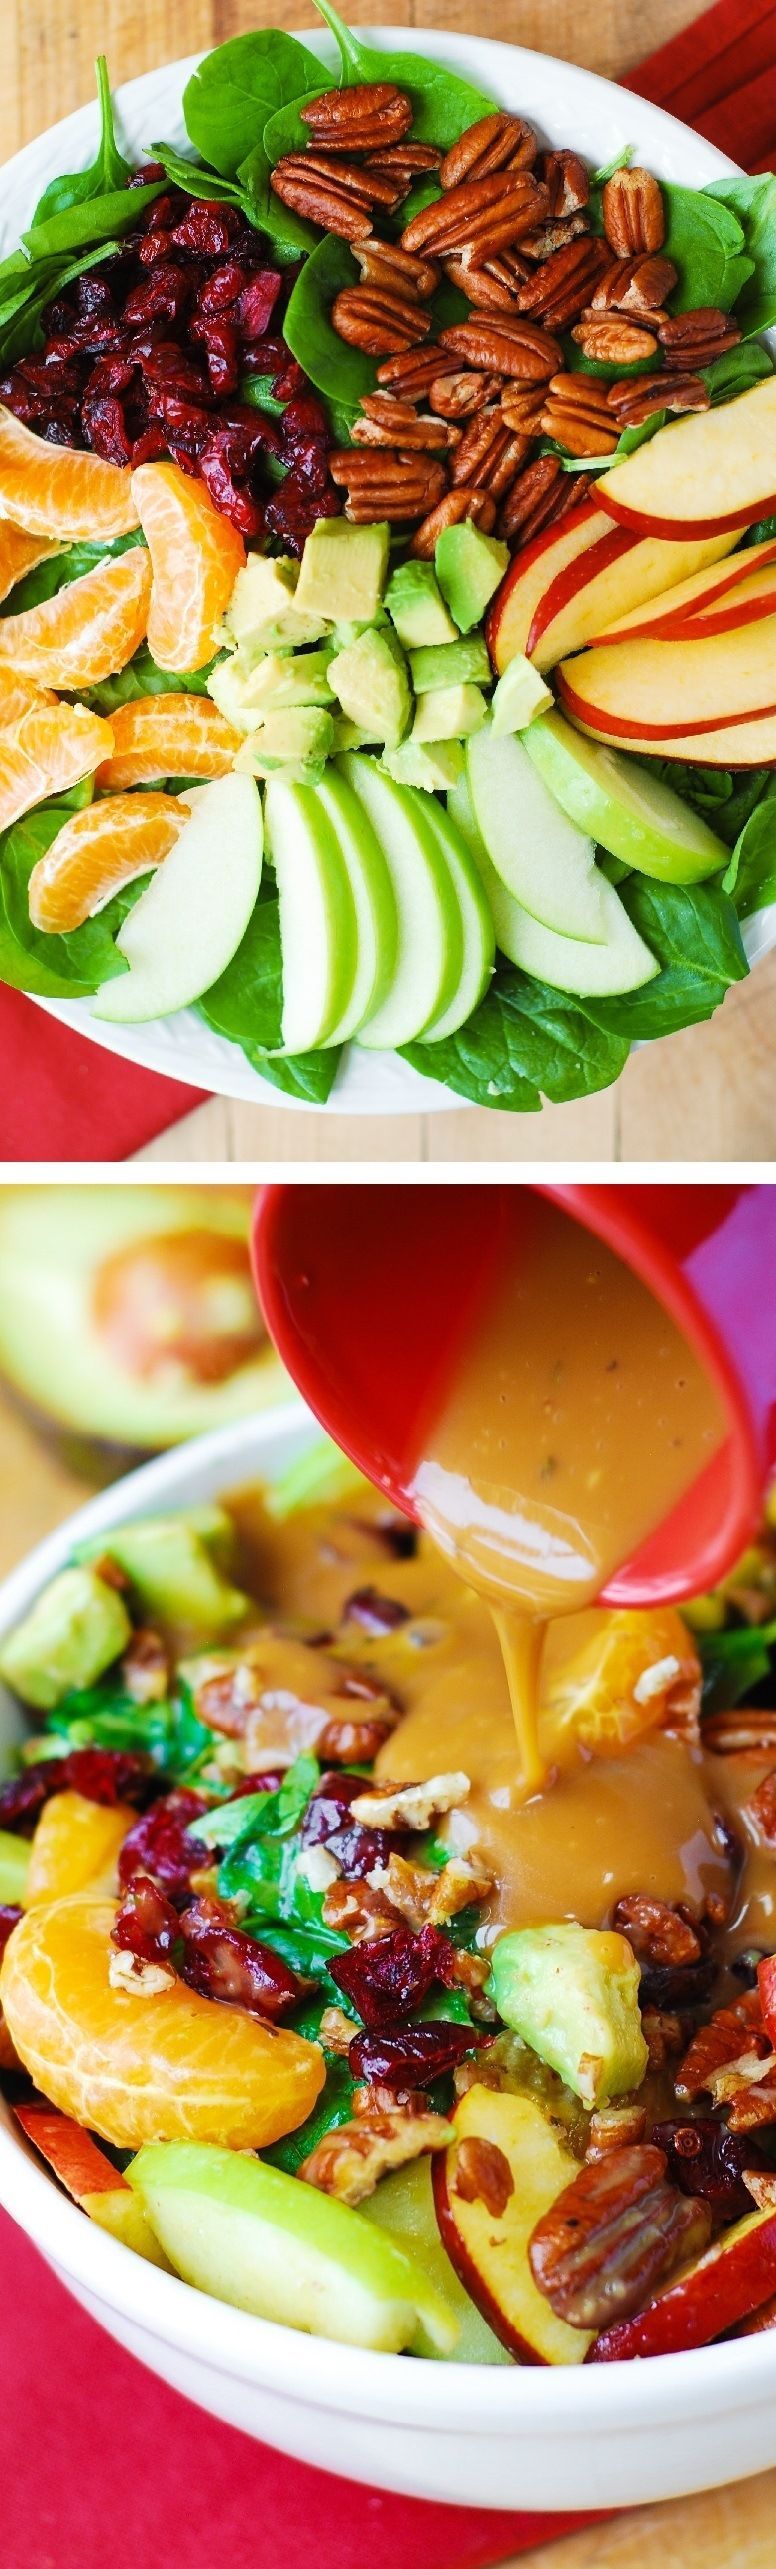 Apple Cranberry Spinach Salad with Pecans, Avocados and Balsamic Vinaigrette